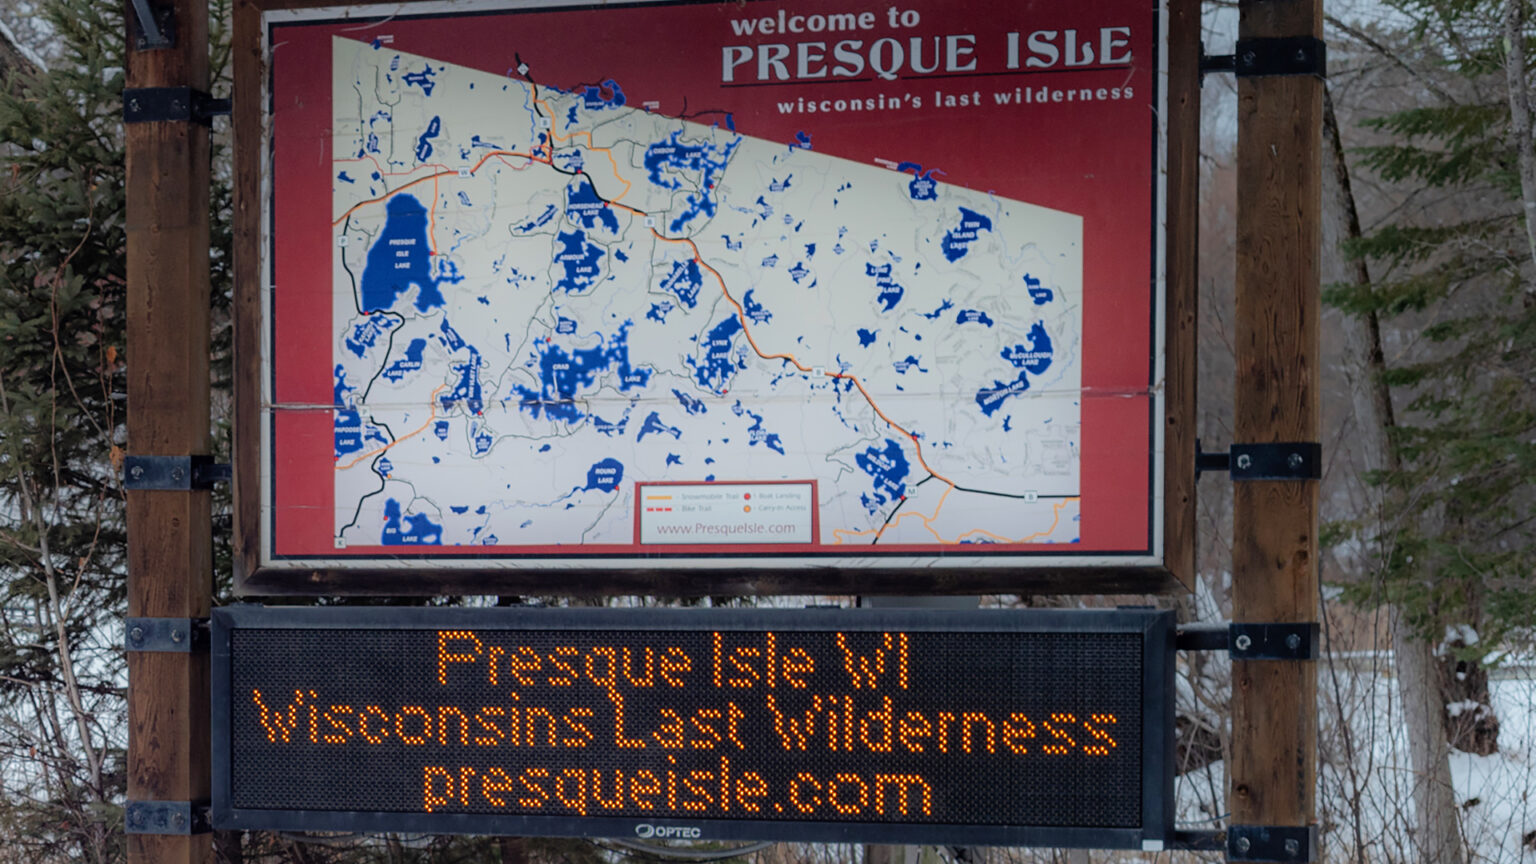 A sign with the words welcome to Presque Isle and wisconsin's last wilderness shows the outlines of a municipality with markers for roads and labels for bodies of water is placed between two wood posts, with an electronic sign below showing the words Presque Isle WI, Wisconsins Last Wilderness and presqueilse.com, with trees and snowbanks in the background.